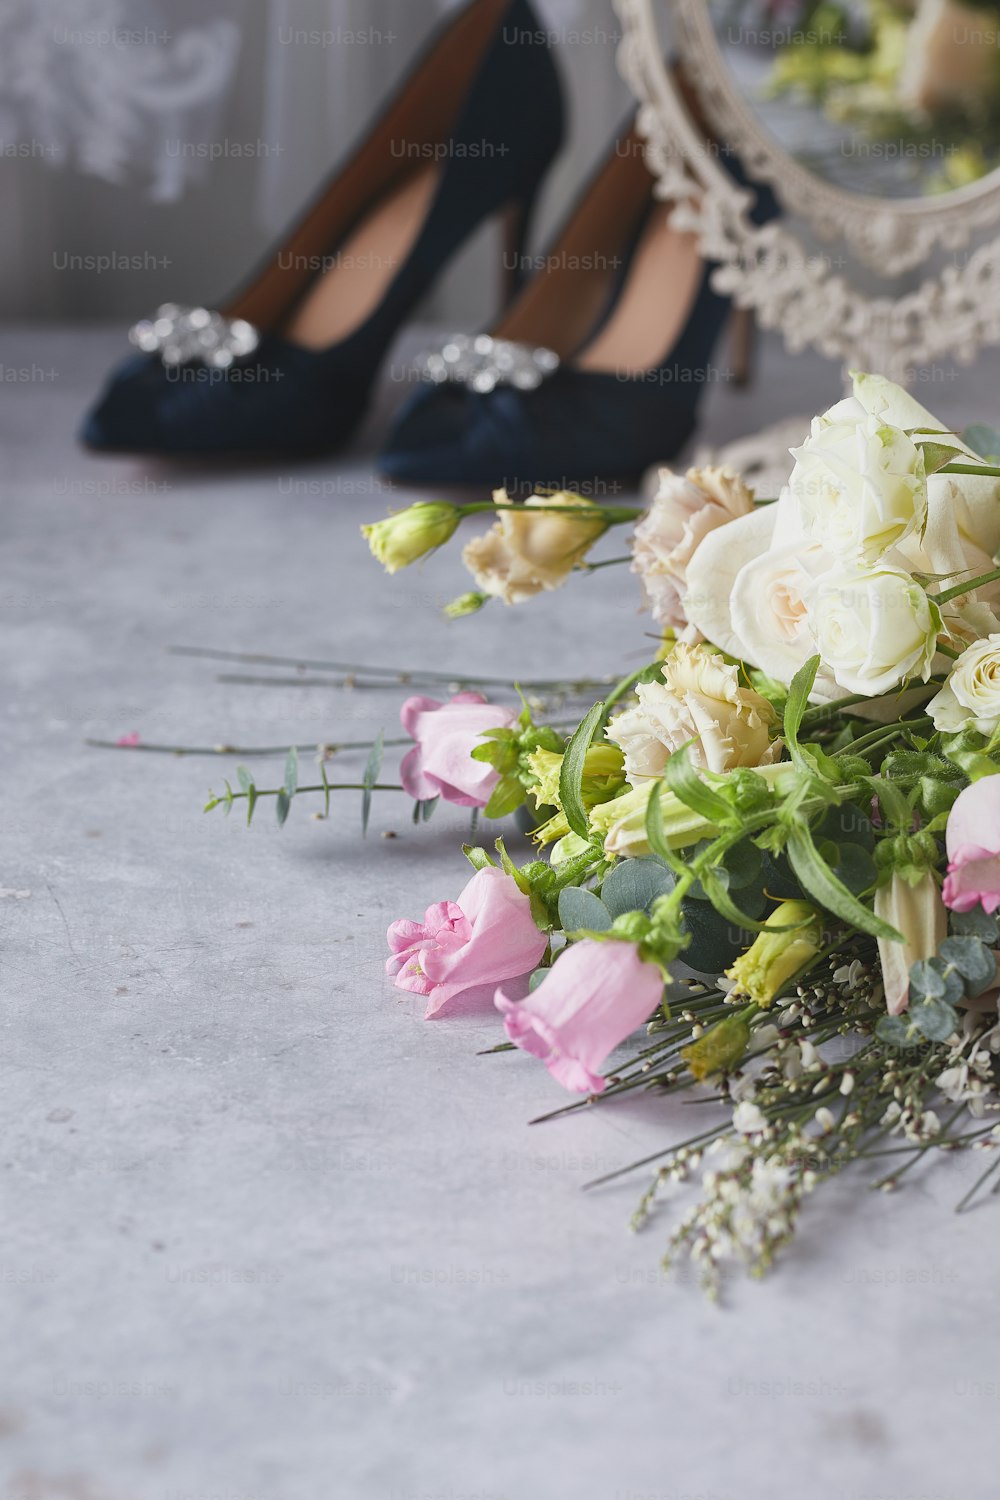 a bouquet of flowers sitting next to a pair of shoes